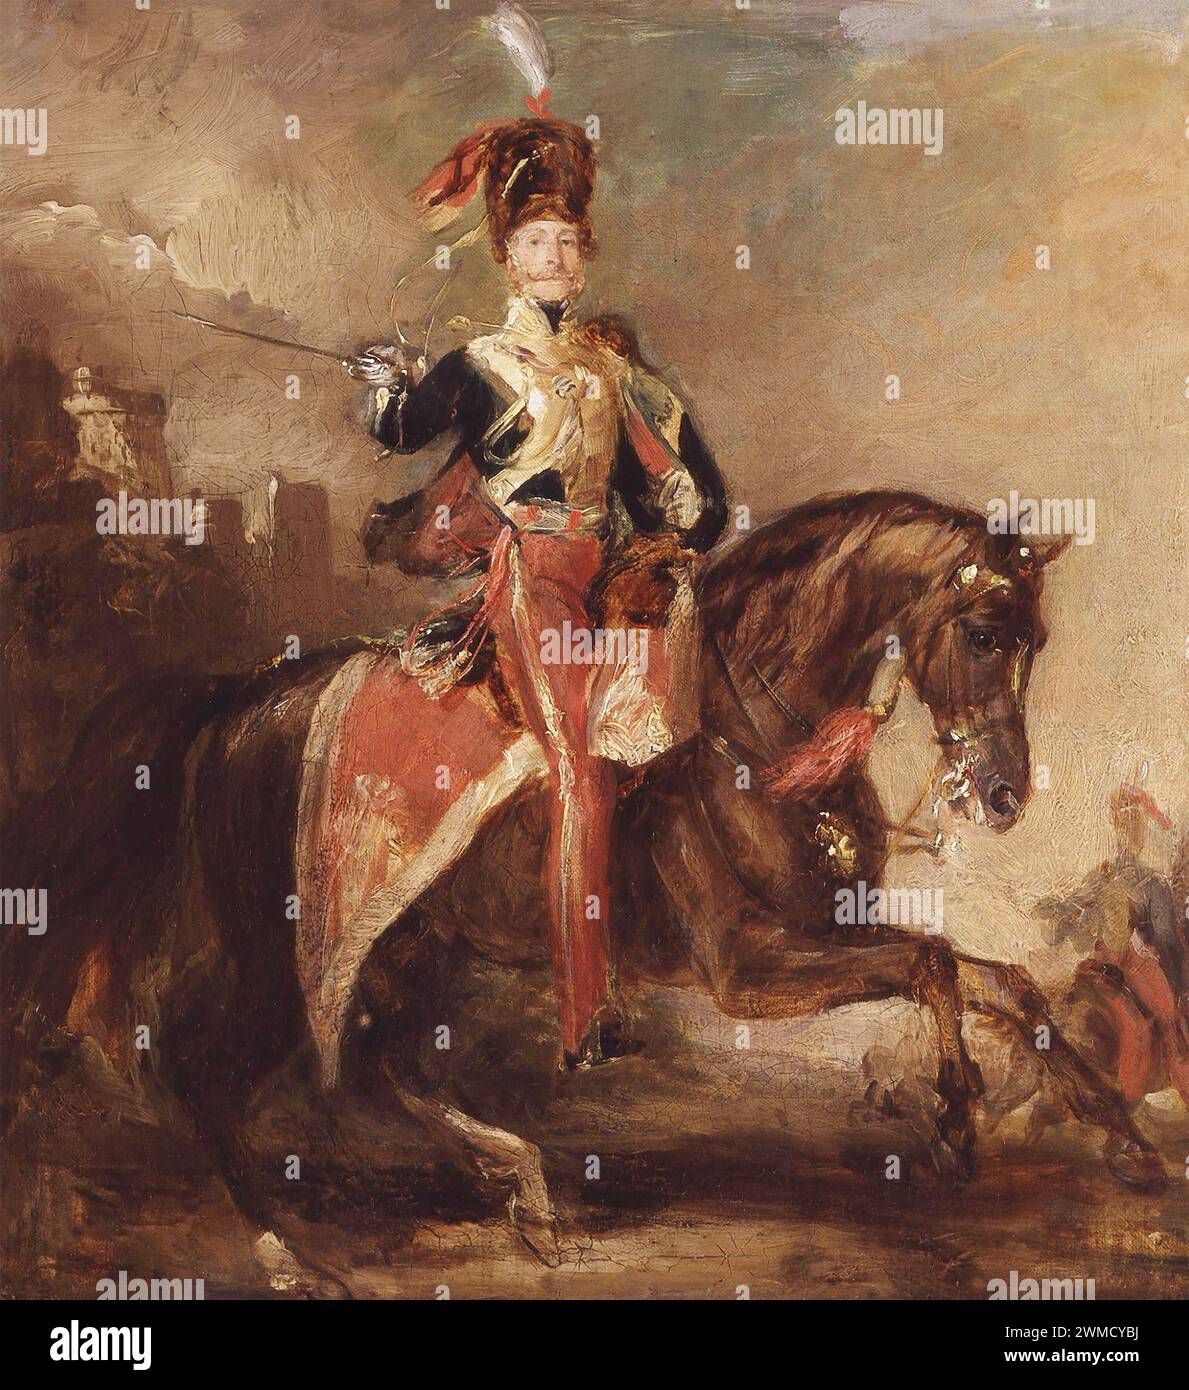 LORD  CARDIGAN, James Brunell, 7th Earl of Cardigan (1797-1868) British Army officer  about 1850. Commanded the Light Brigade during the Crimean War. Painting by Francis Gratnt,1841. Stock Photo